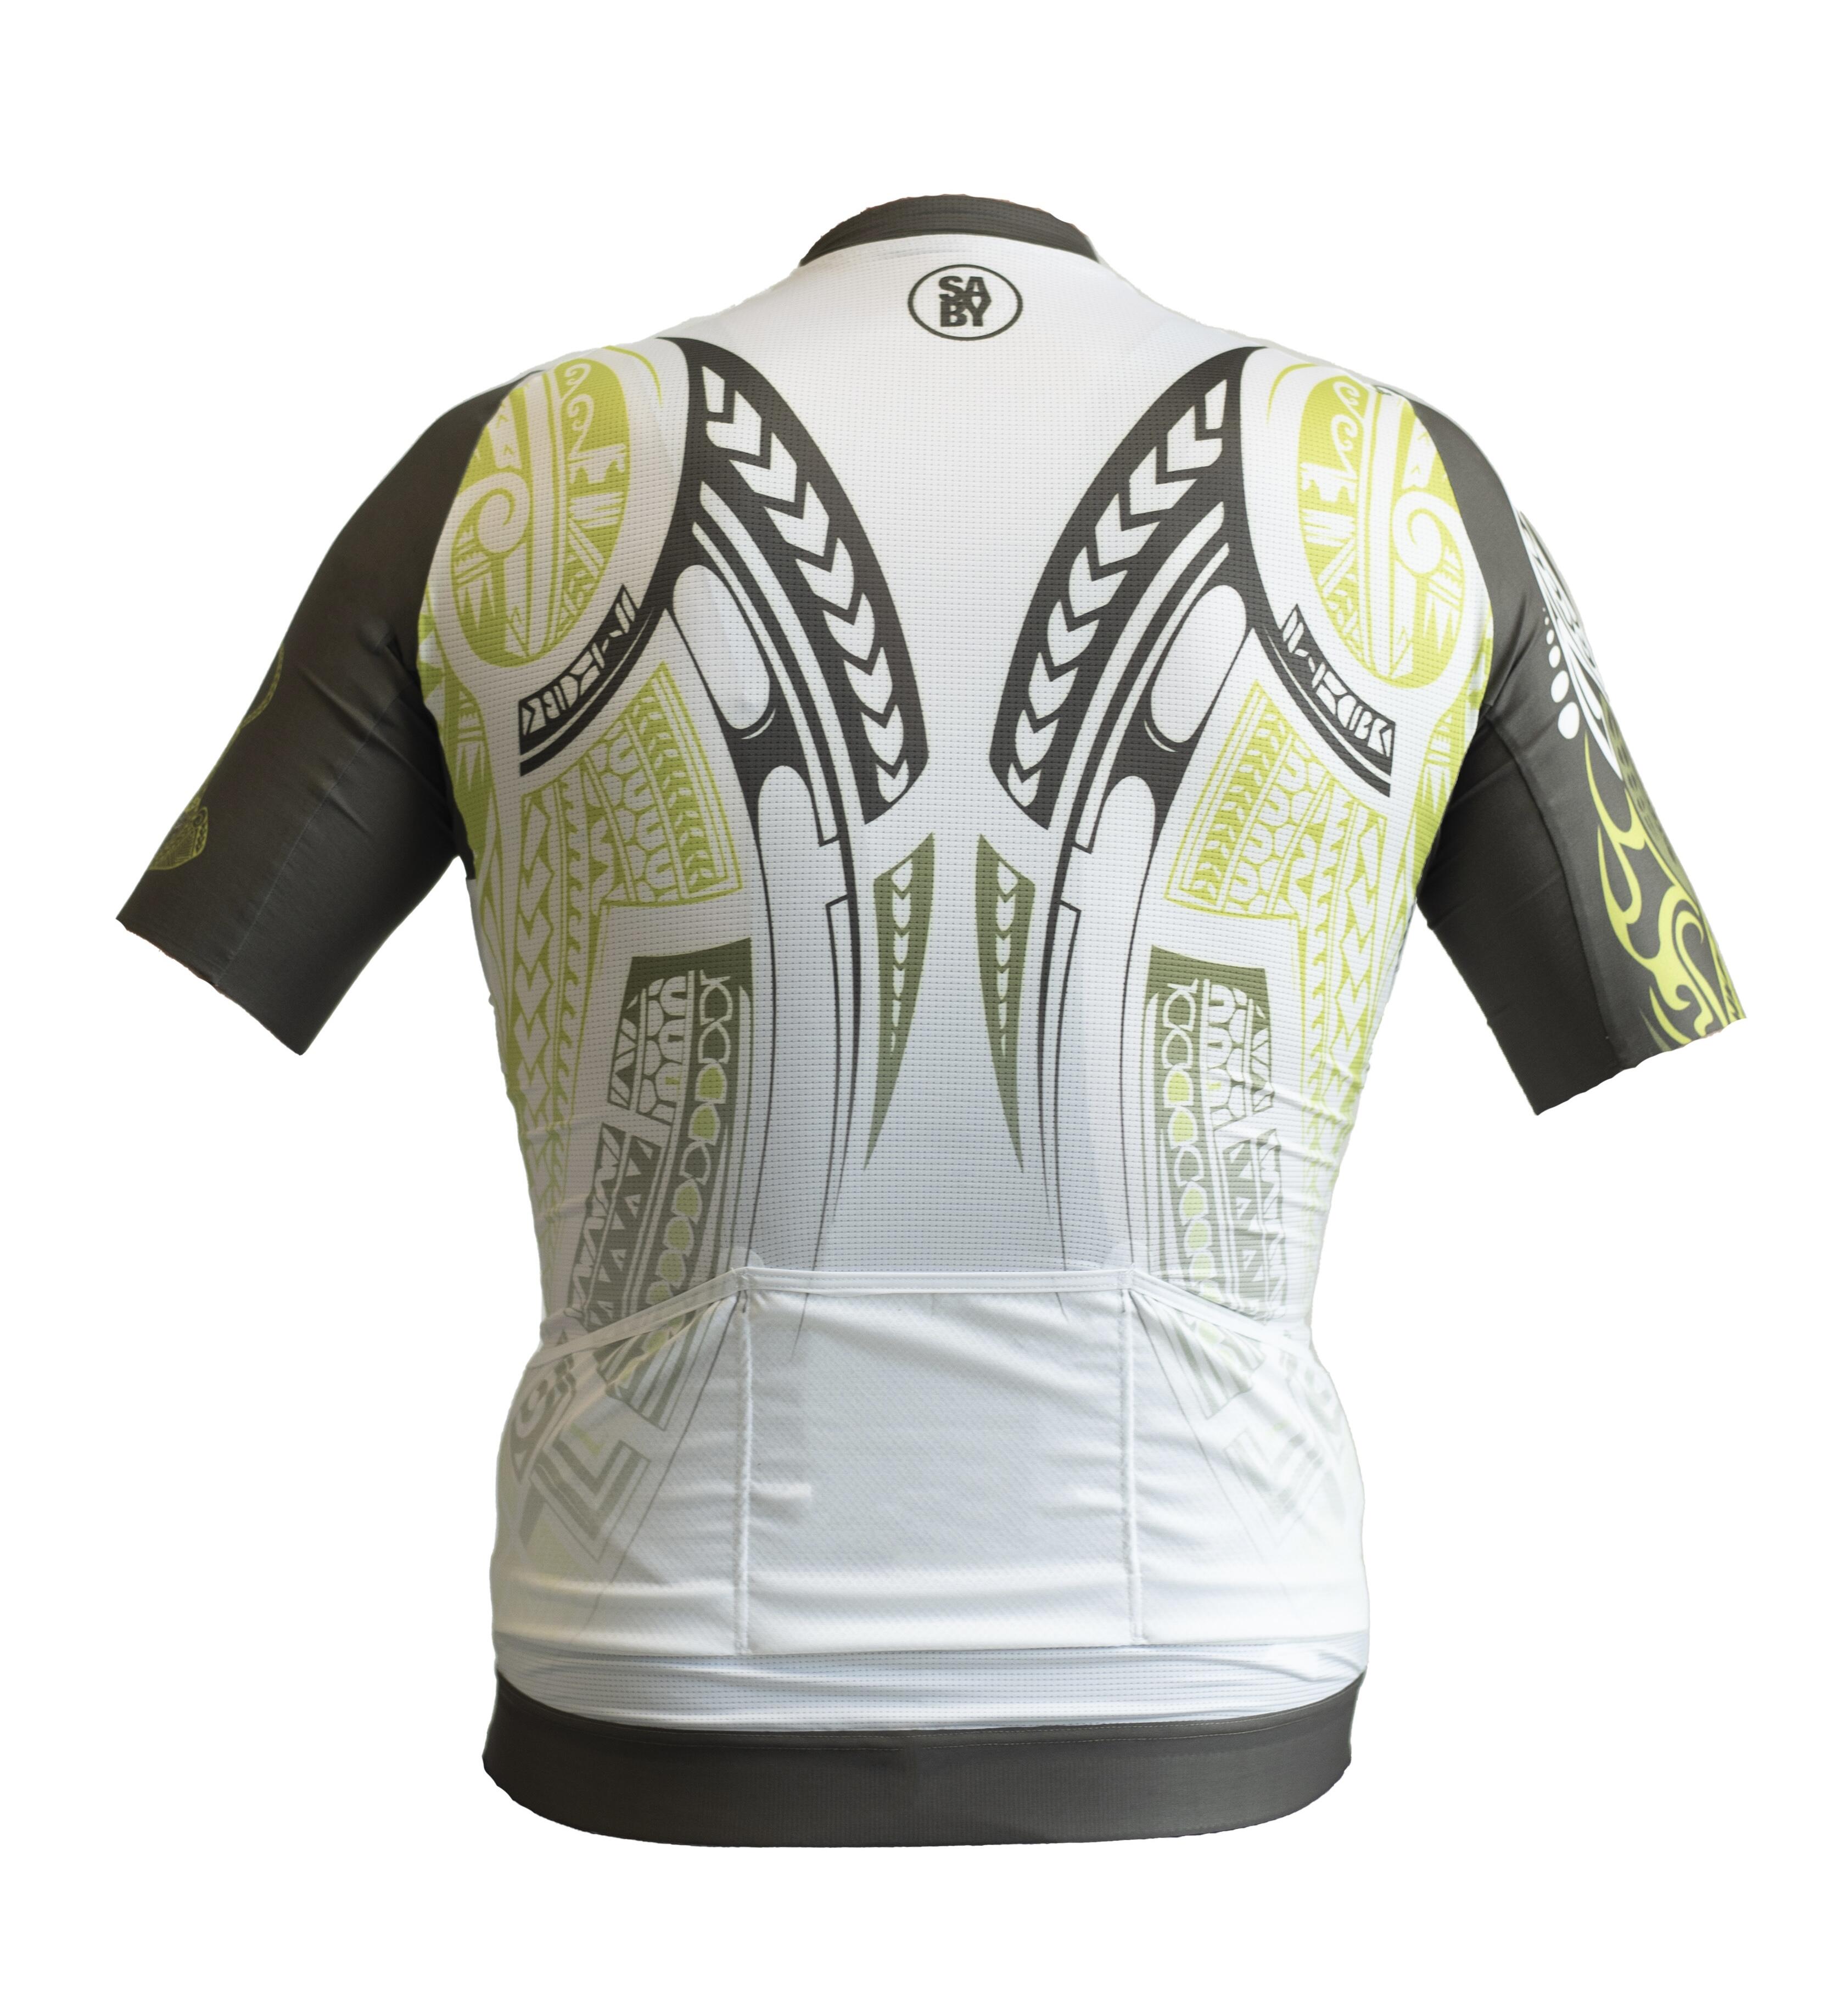 Maglia Limited Edition Tribe Green